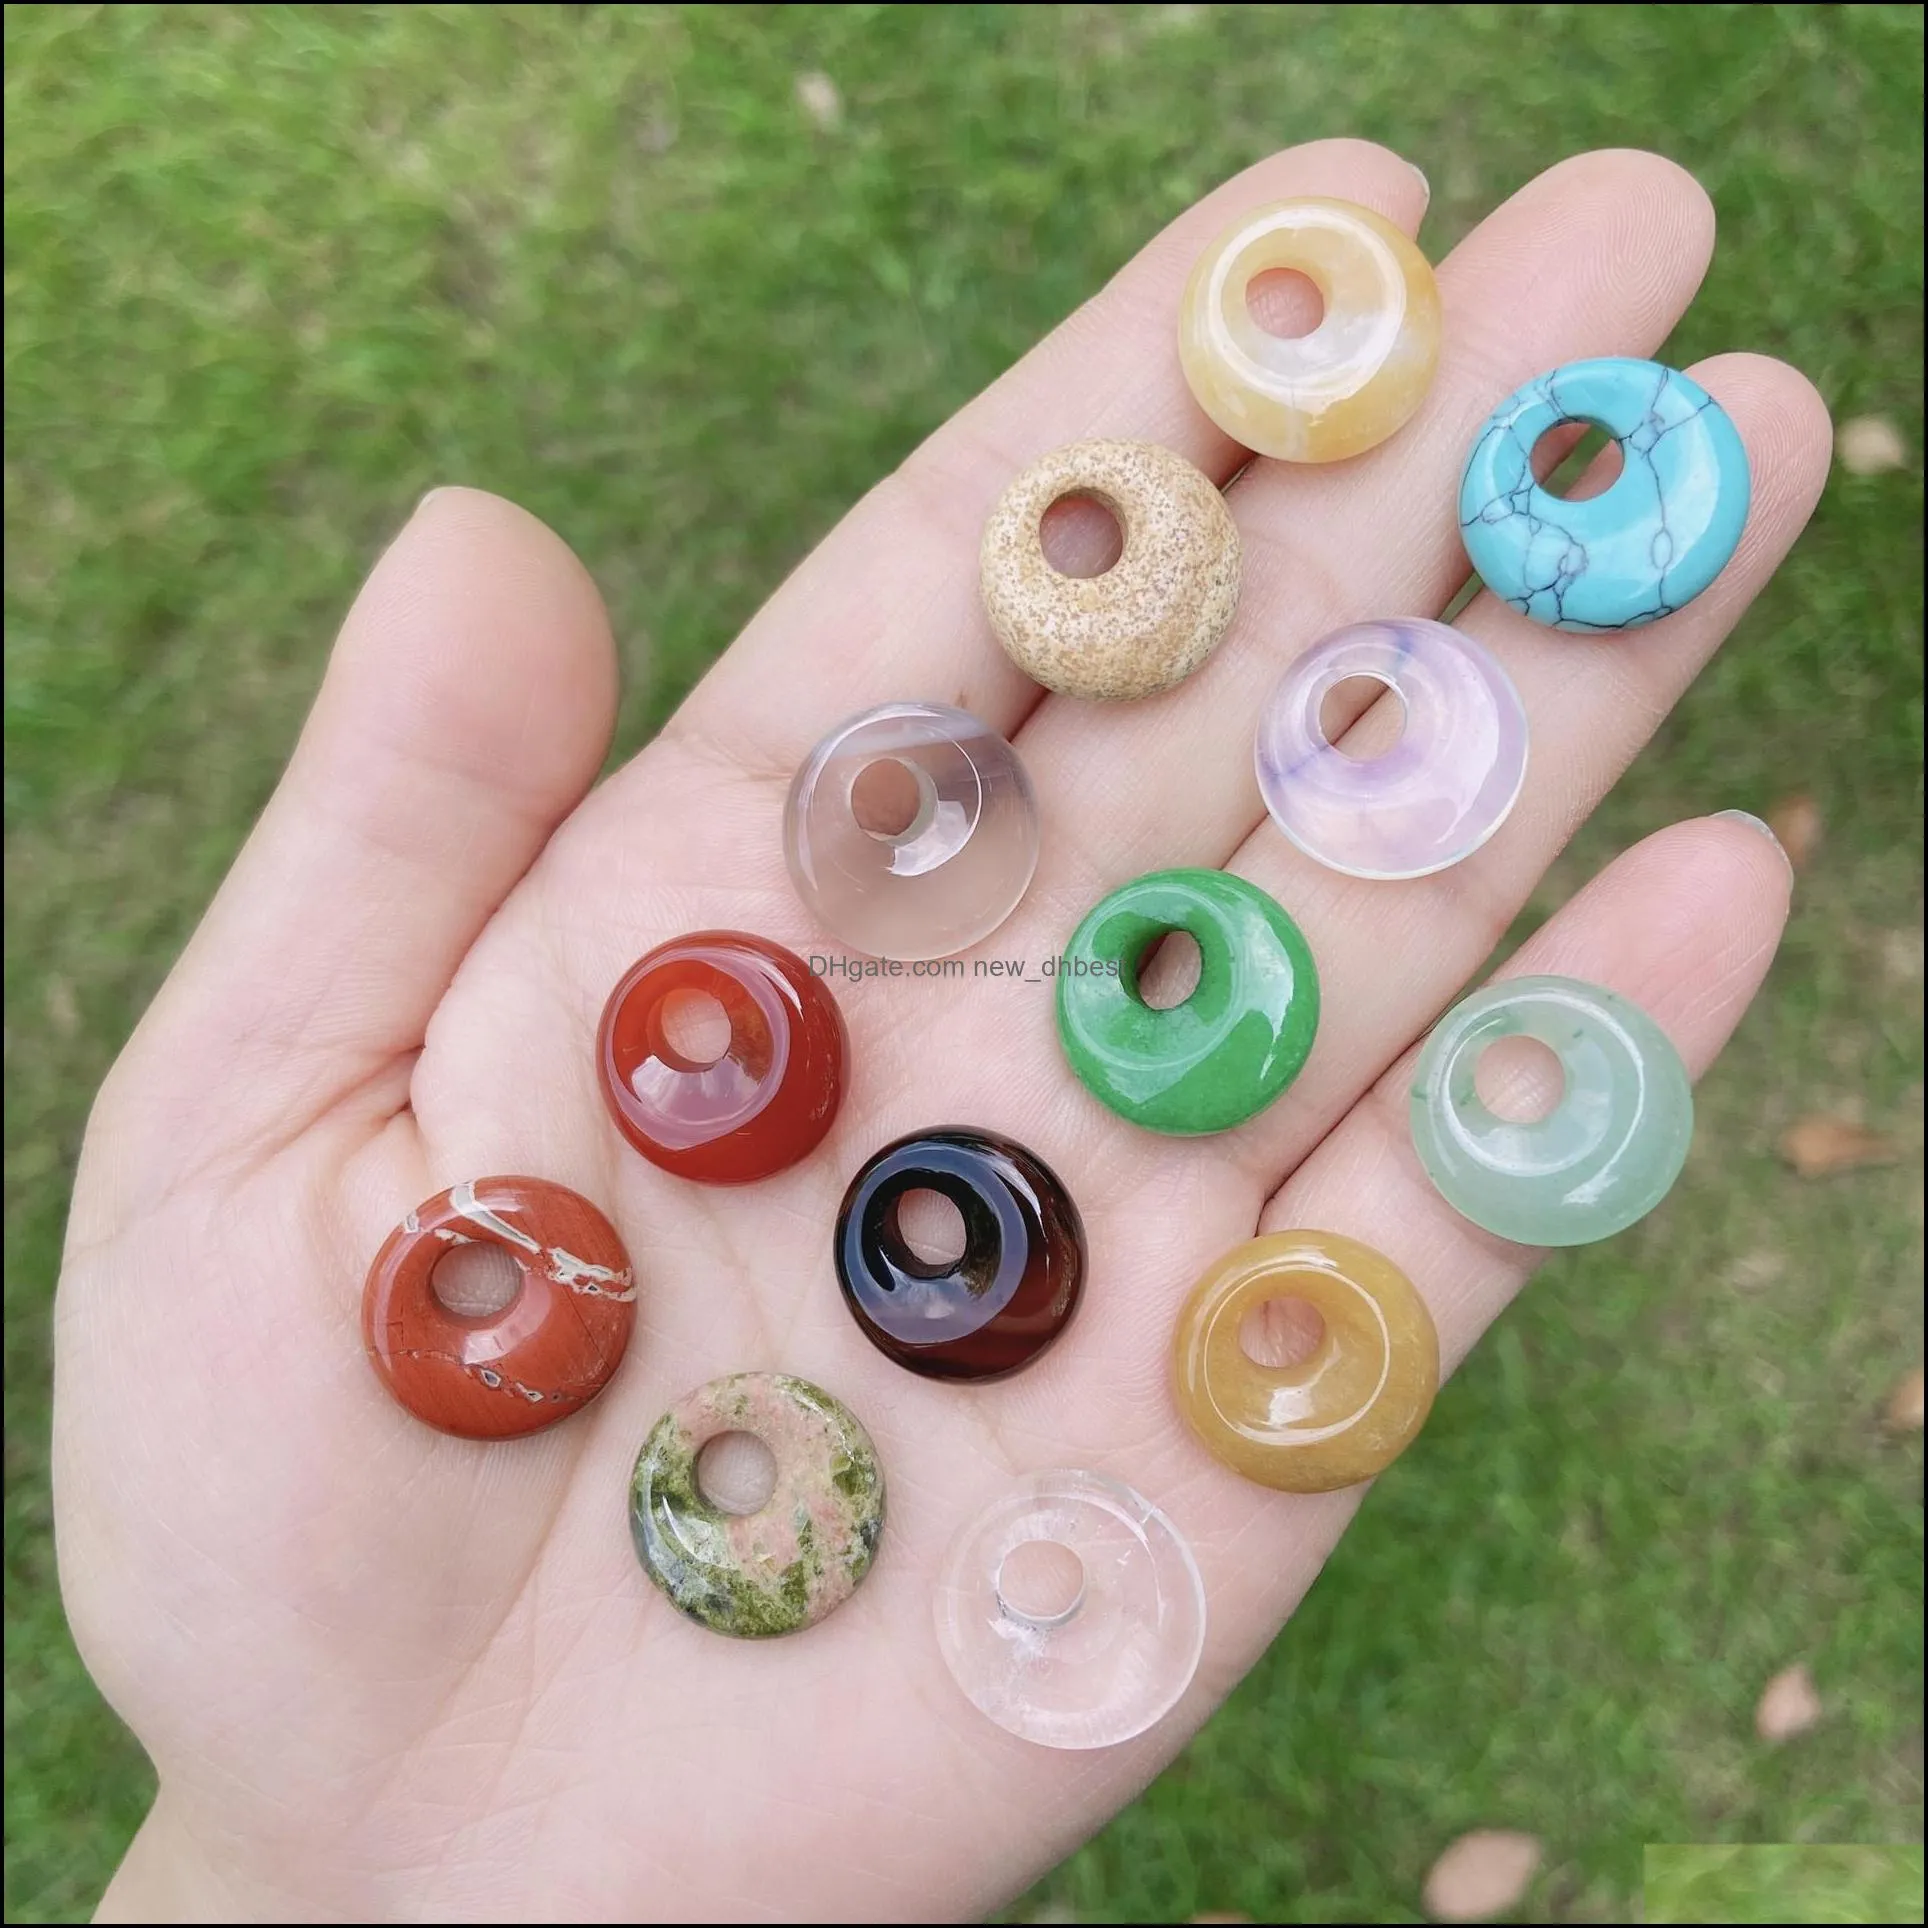 Natural Stone Car DVR Charms 18mm Gogo Donut Jasper Beads For Jewelry  Making Necklace, Pendant, Earrings Fashion Accessories Fast Drop Delivery  DH28R From Lulu_baby, $0.52